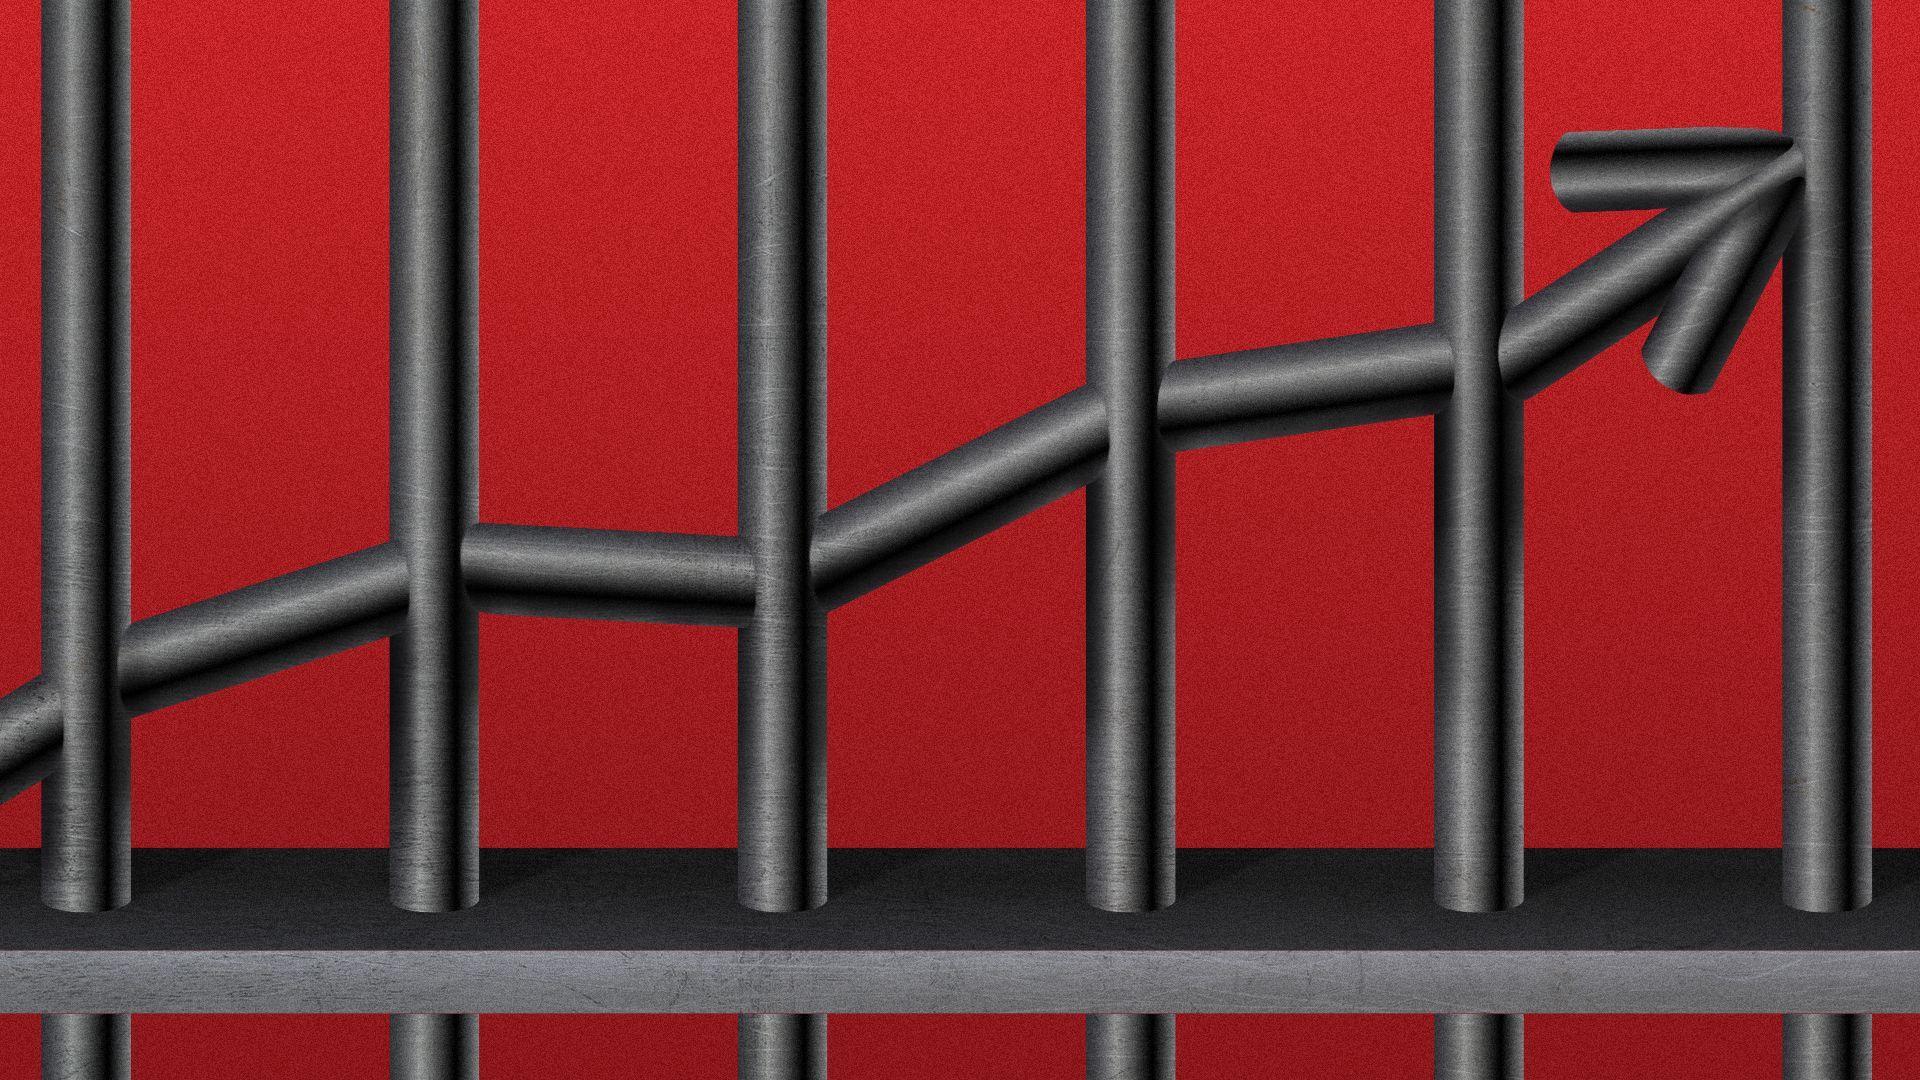 Illustration of an arrow trending up on a chart made of prison bars.